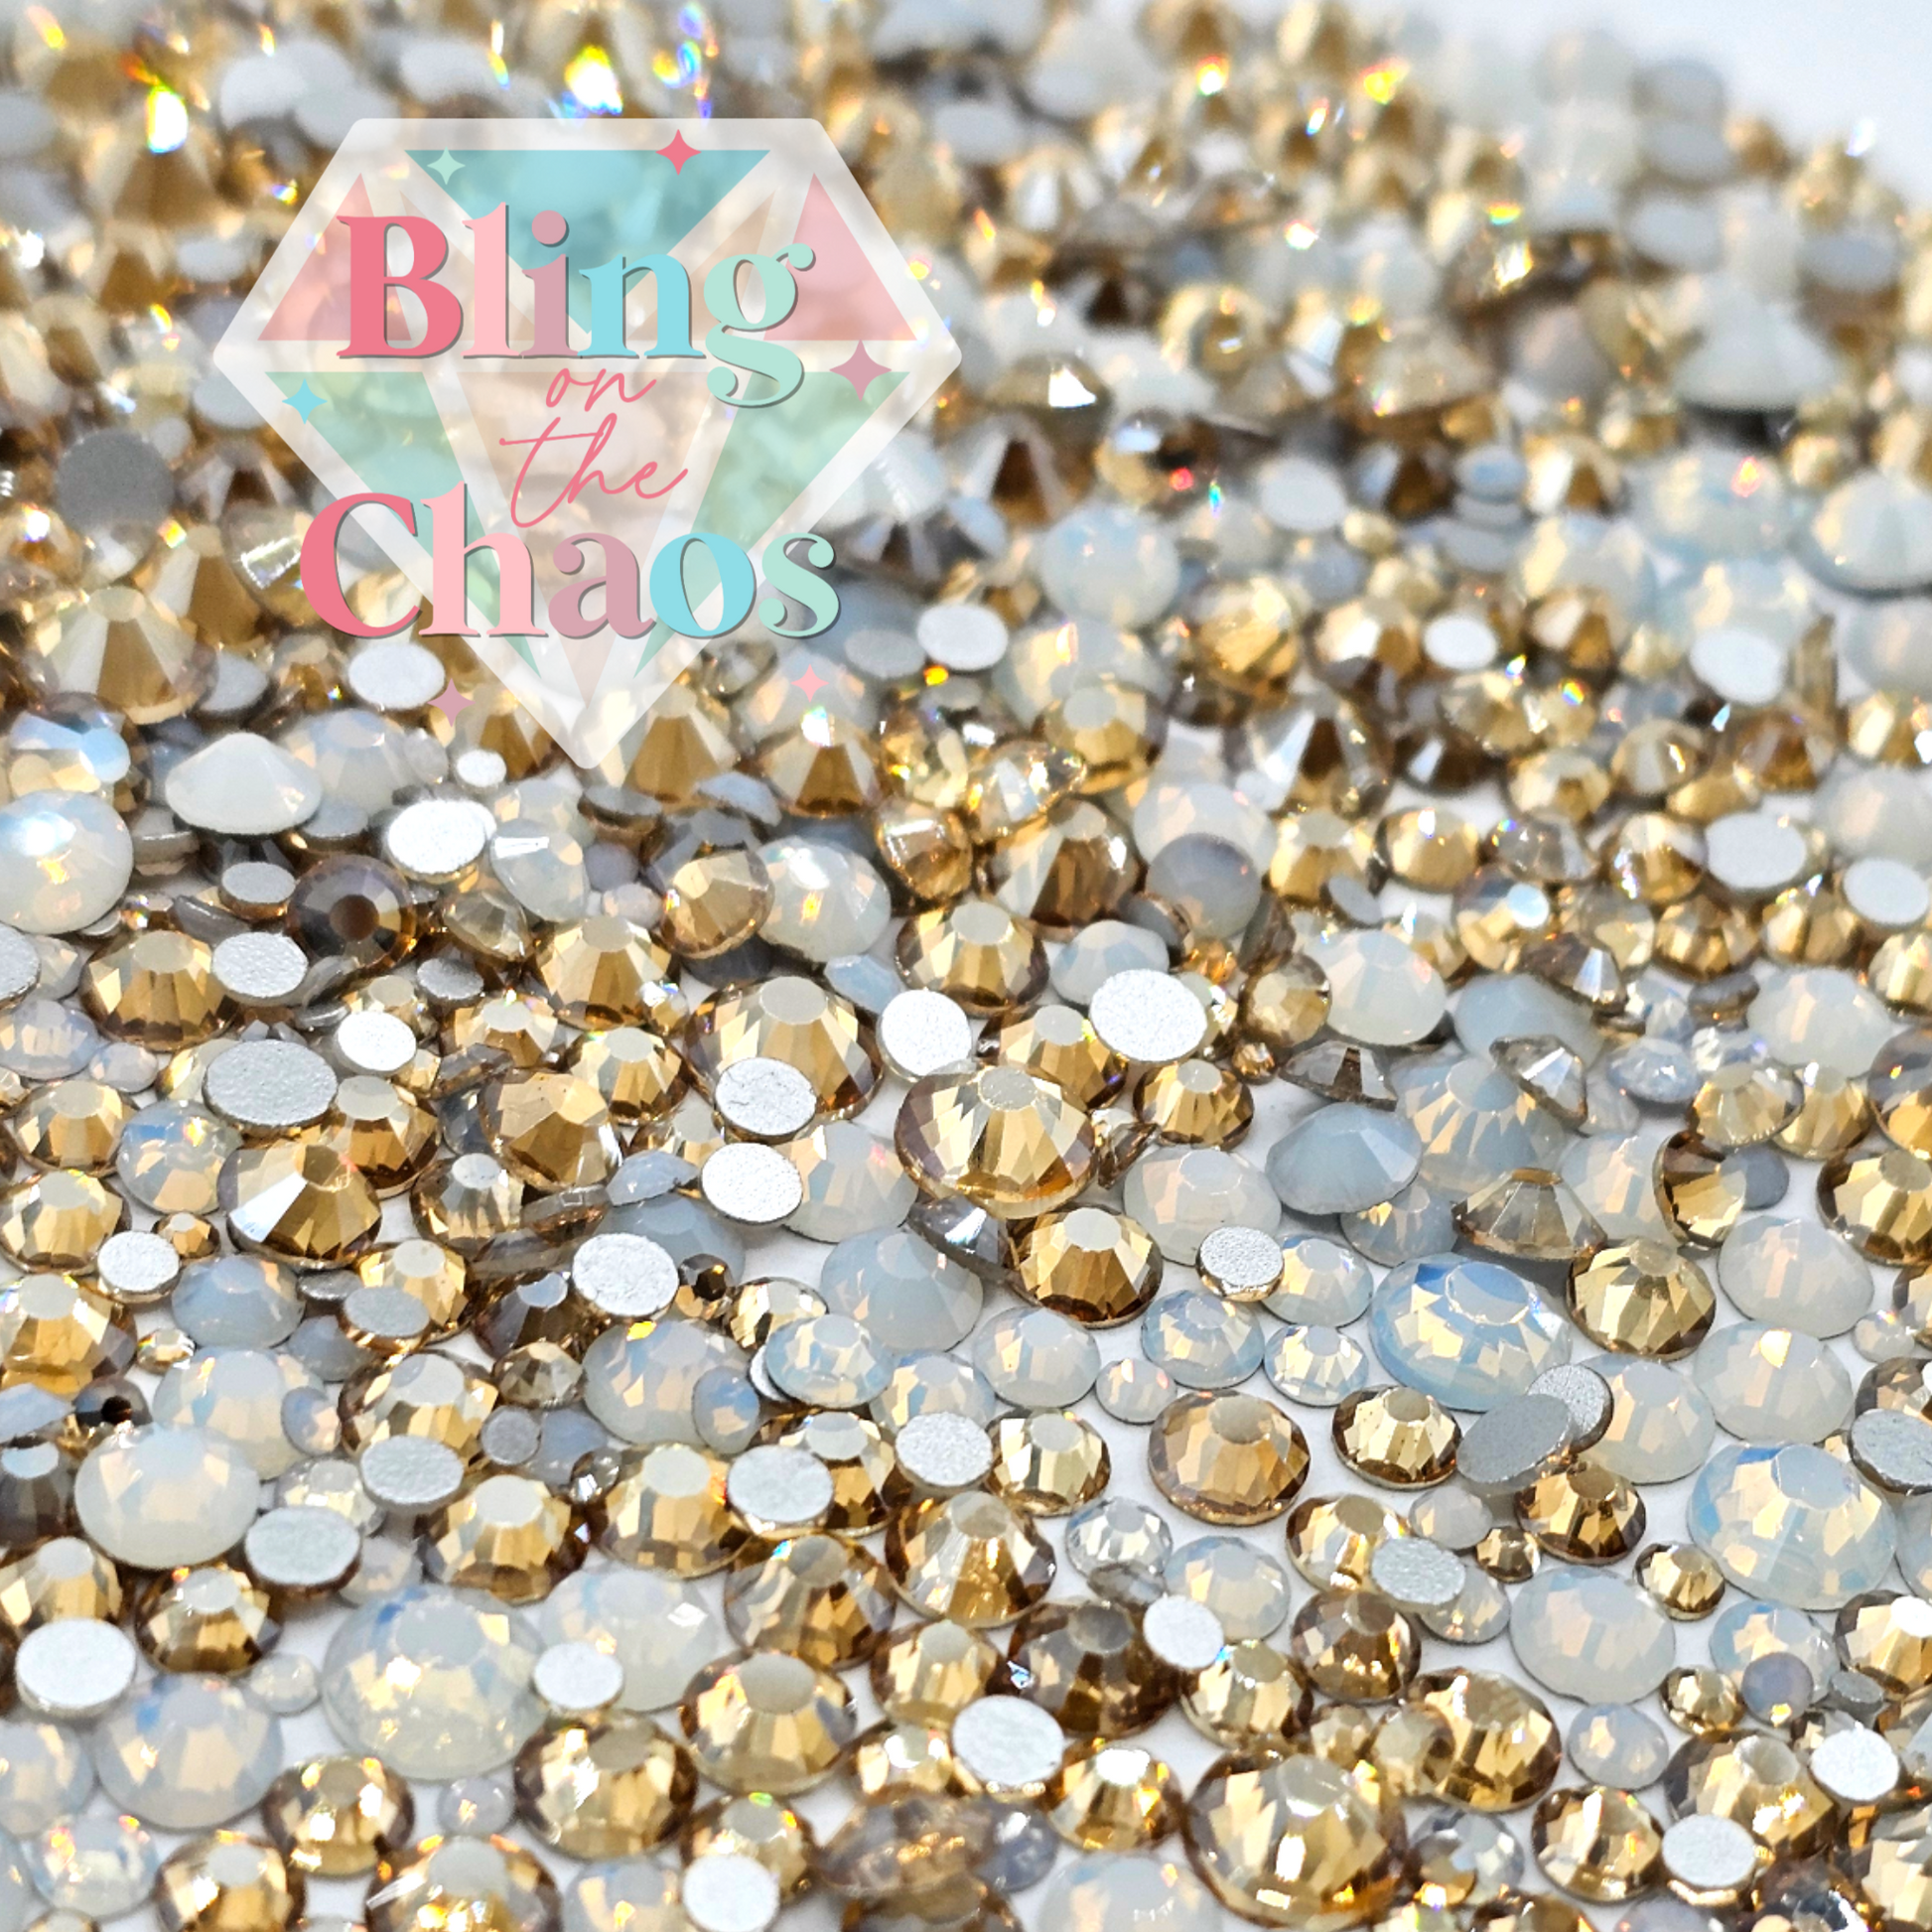 Crisp Chardonnay Specialty Mix-Glass Rhinestones-Bling on the Chaos